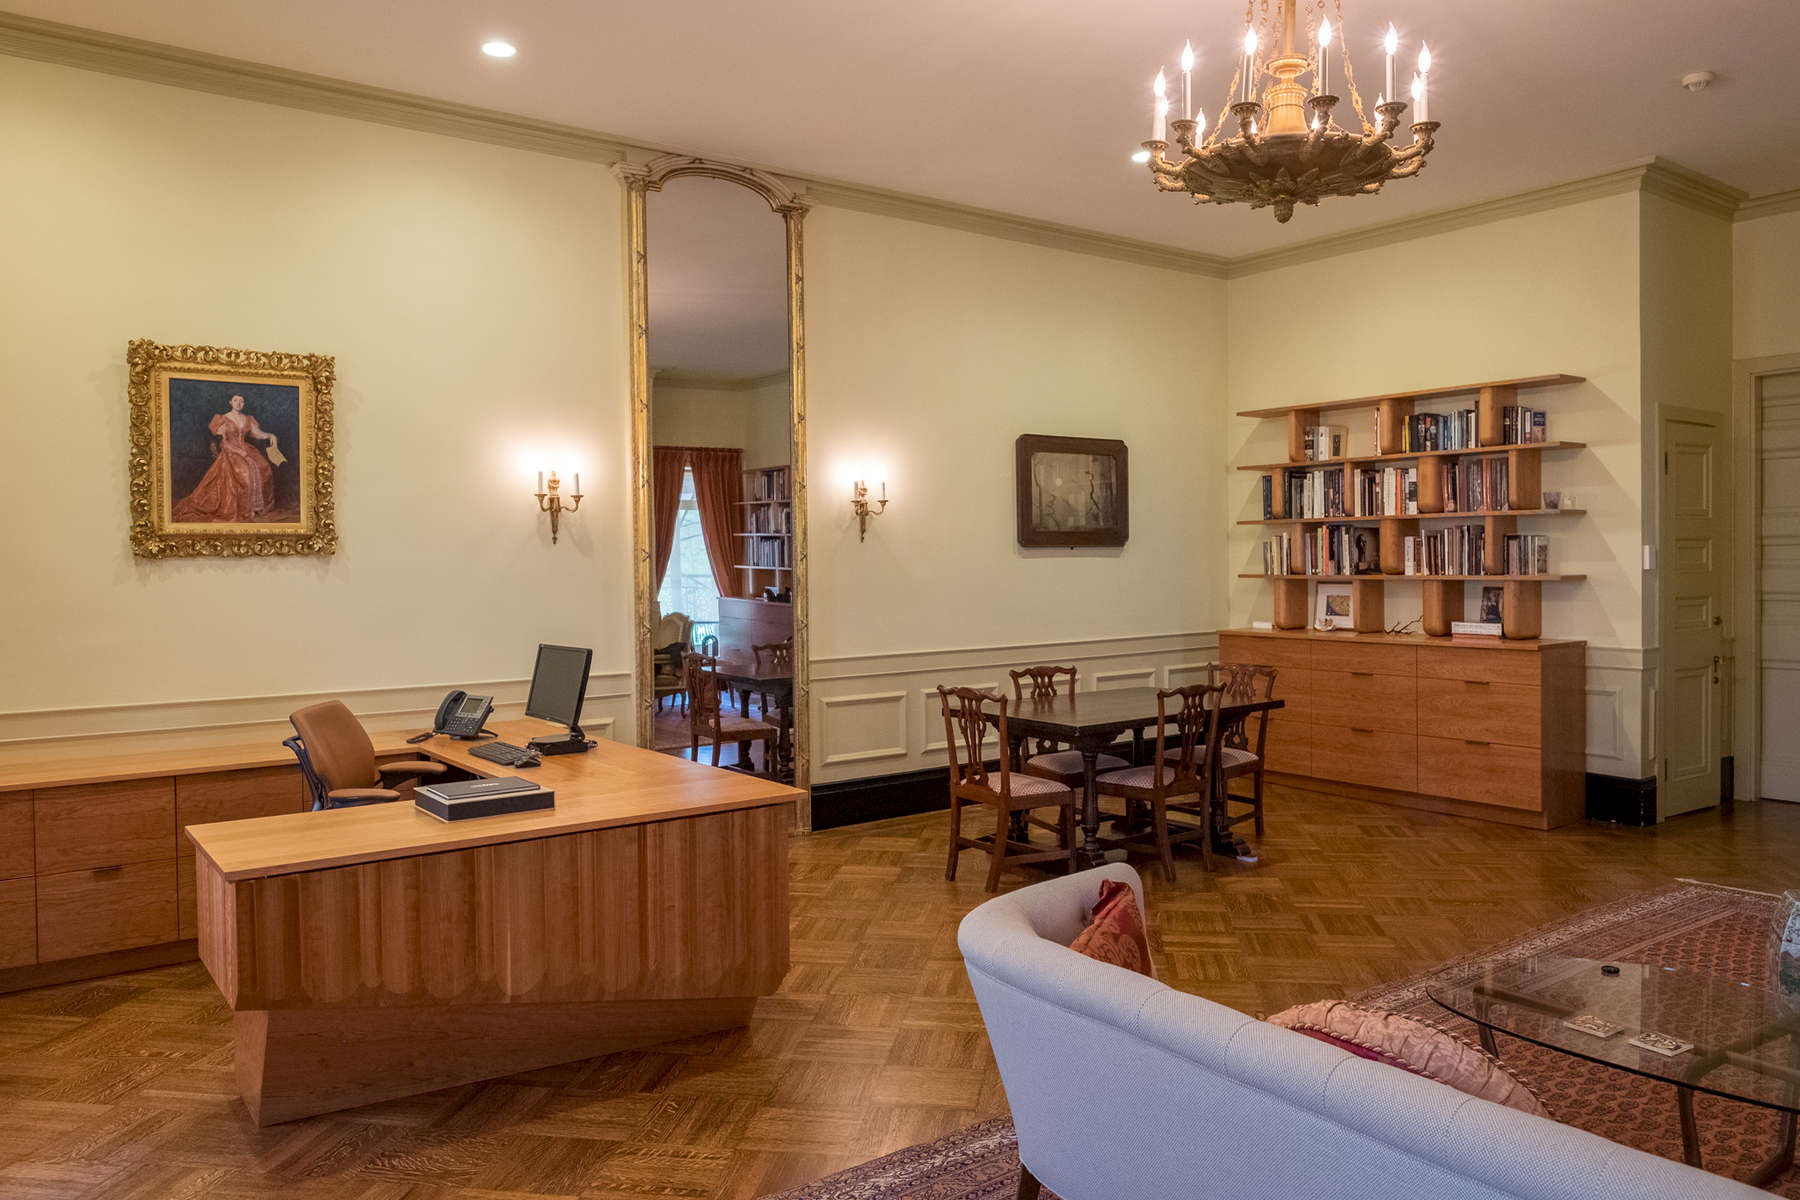 IKD was hired to renovate and design custom furniture for the new Isabella Stewart Gardner Museum Directors office. Photo by Christian Borger